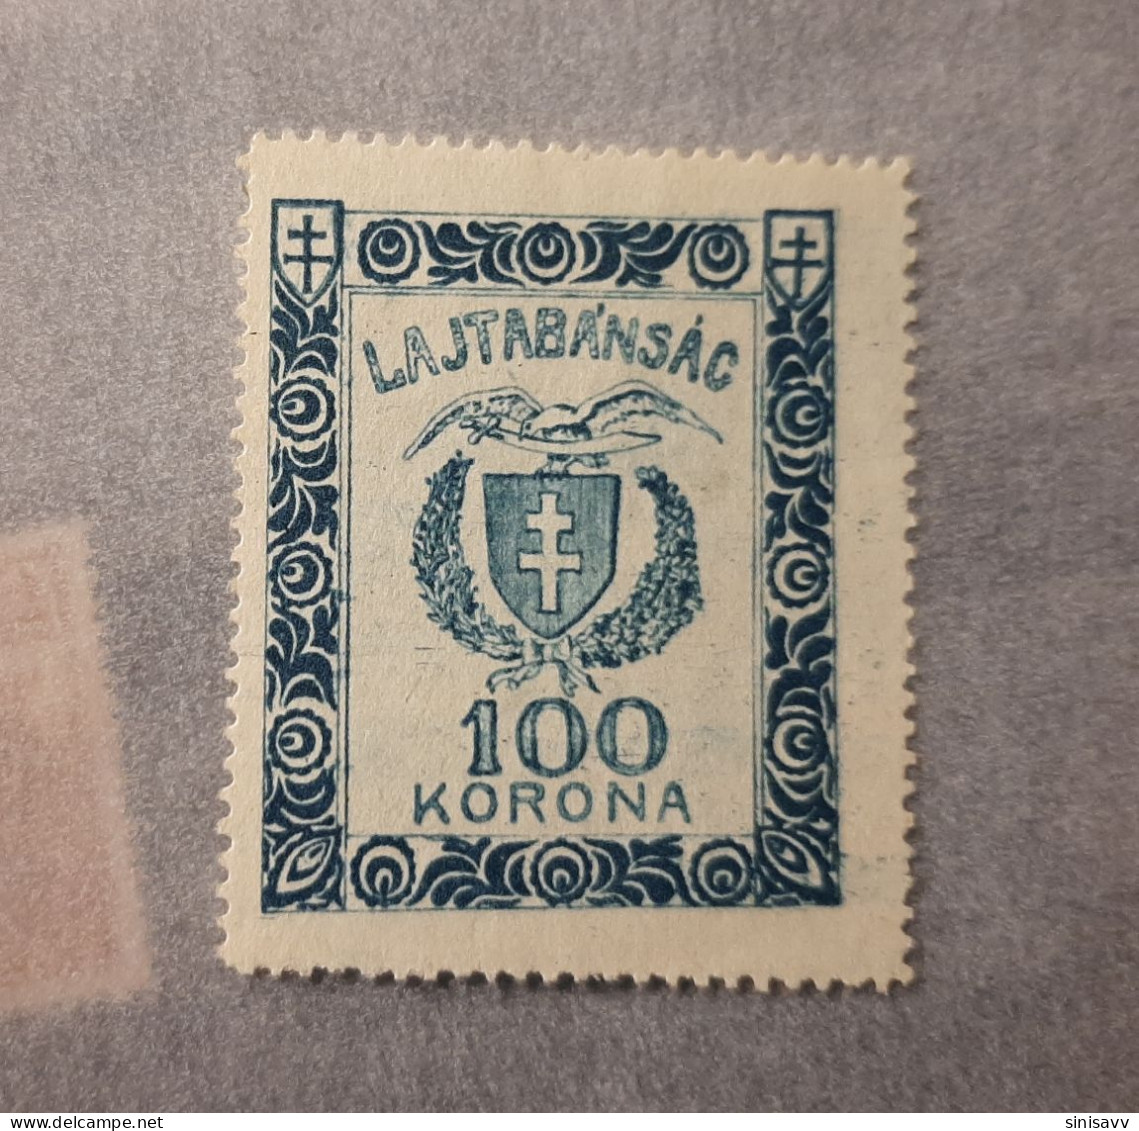 Western Hungary - Local Stamps 1921 - Lajtabánság - Emissions Locales